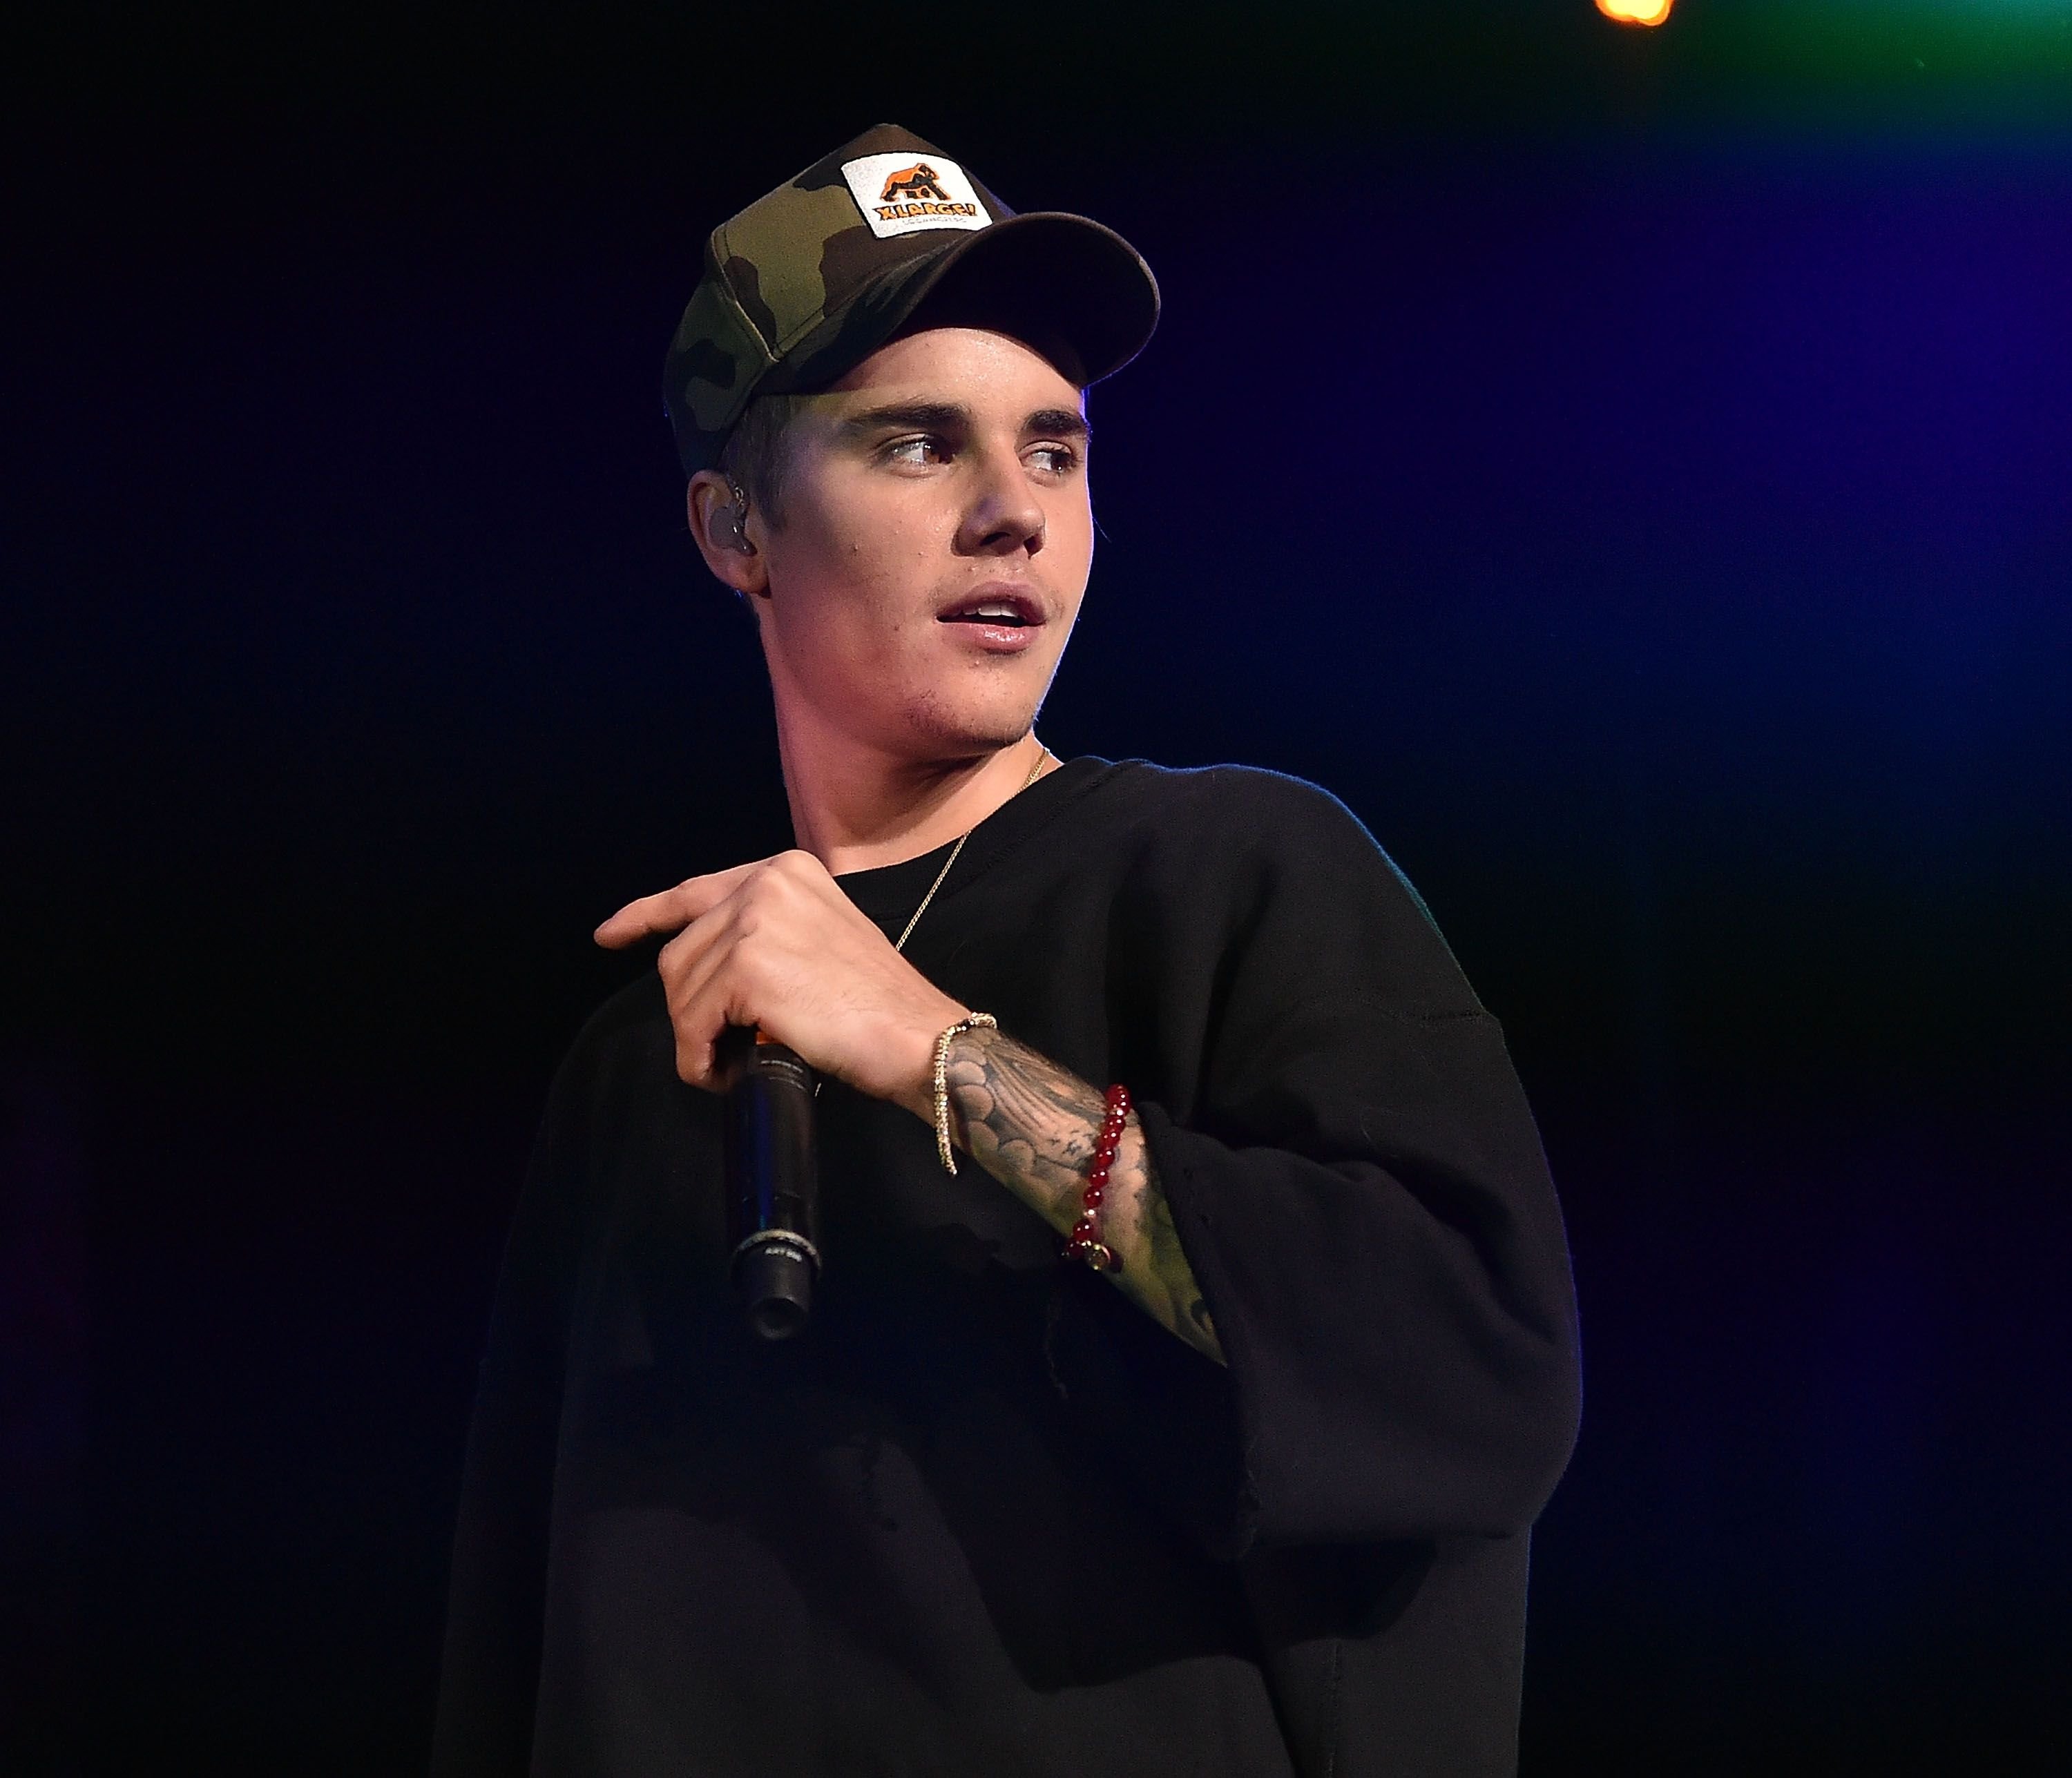 Justin Bieber at Power 96.1's Jingle Ball at Phillips Arena on December 17, 2015, in Atlanta, Georgia | Photo: Paras Griffin/Getty Images